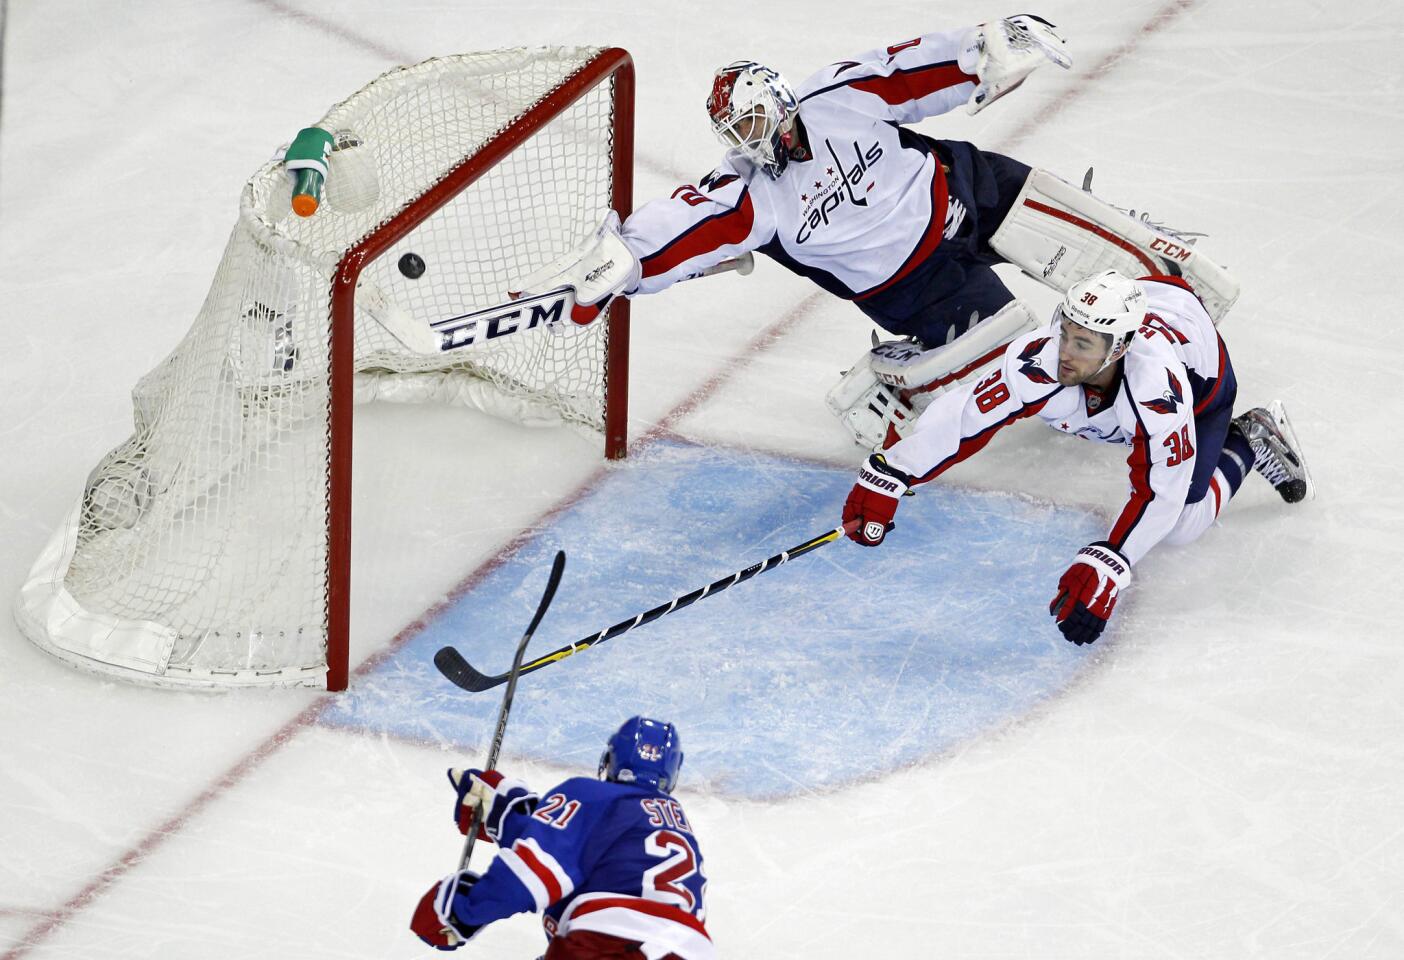 New York Rangers center Derek Stepan shoots and scores on Washington Capitals goalie Braden Holtby in front of Capitals defenseman Jack Hillen during third period action in Game 4 of their NHL Stanley Cup playoffs Eastern Conference Quarterfinal hockey gam